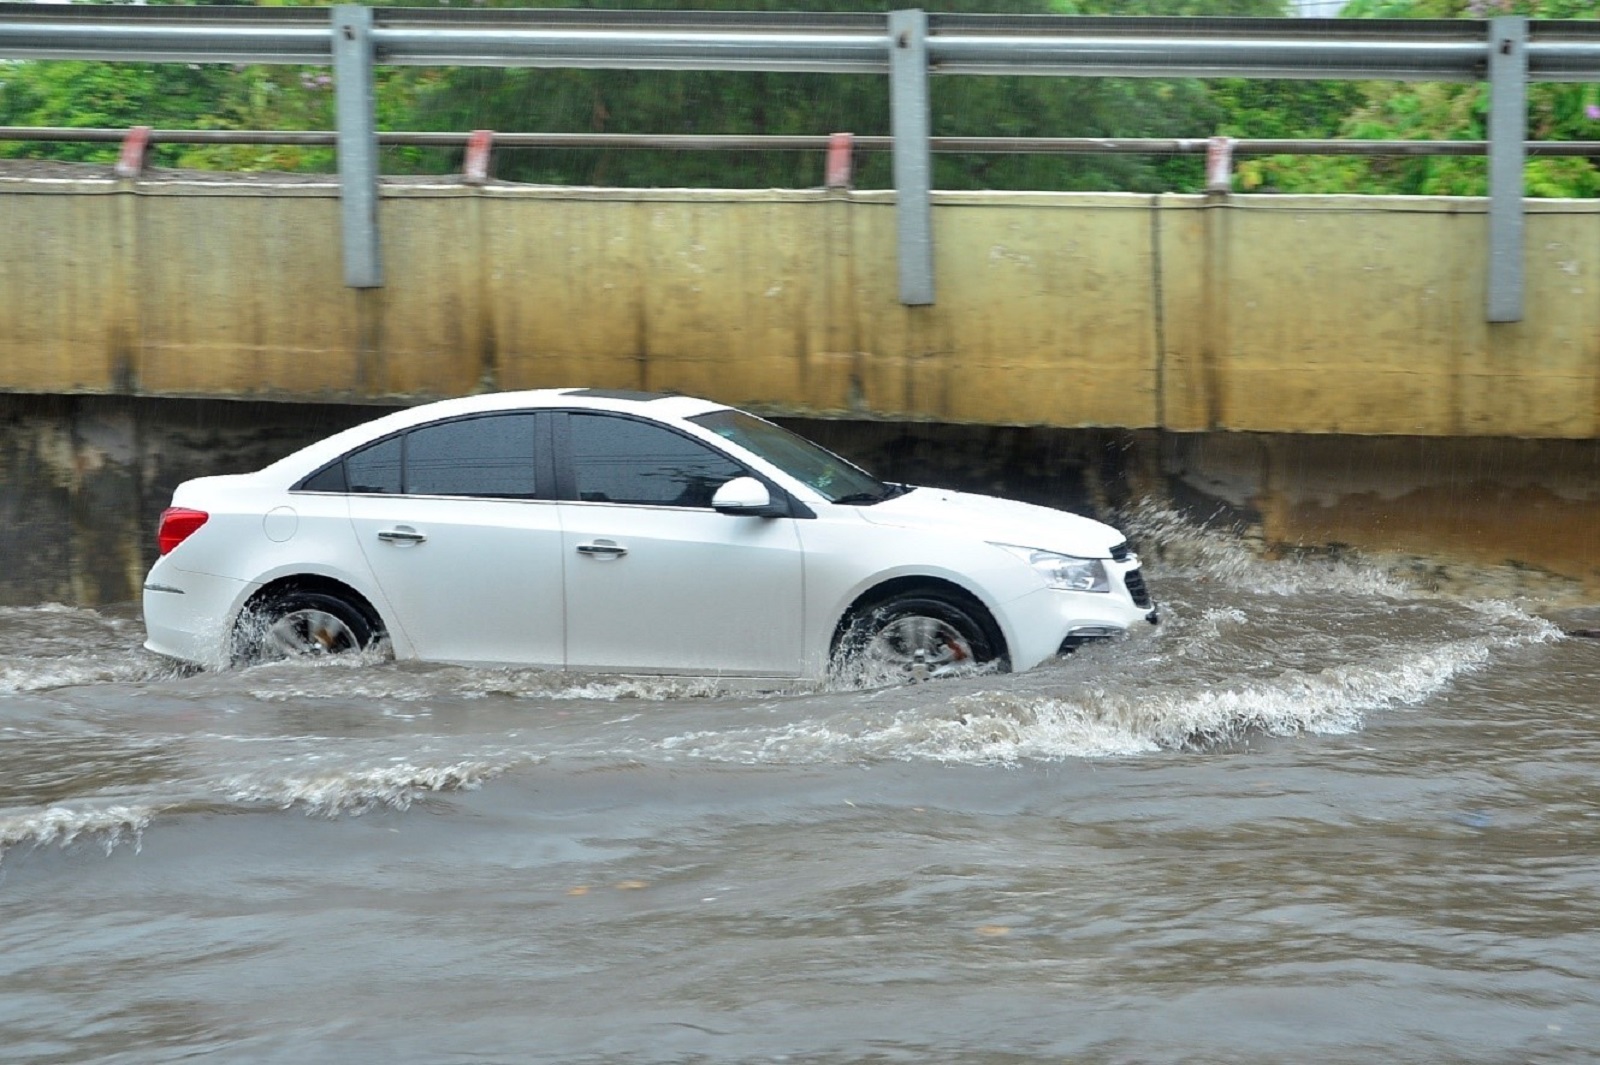 Safe driving skills through flooded areas - Photo 1.